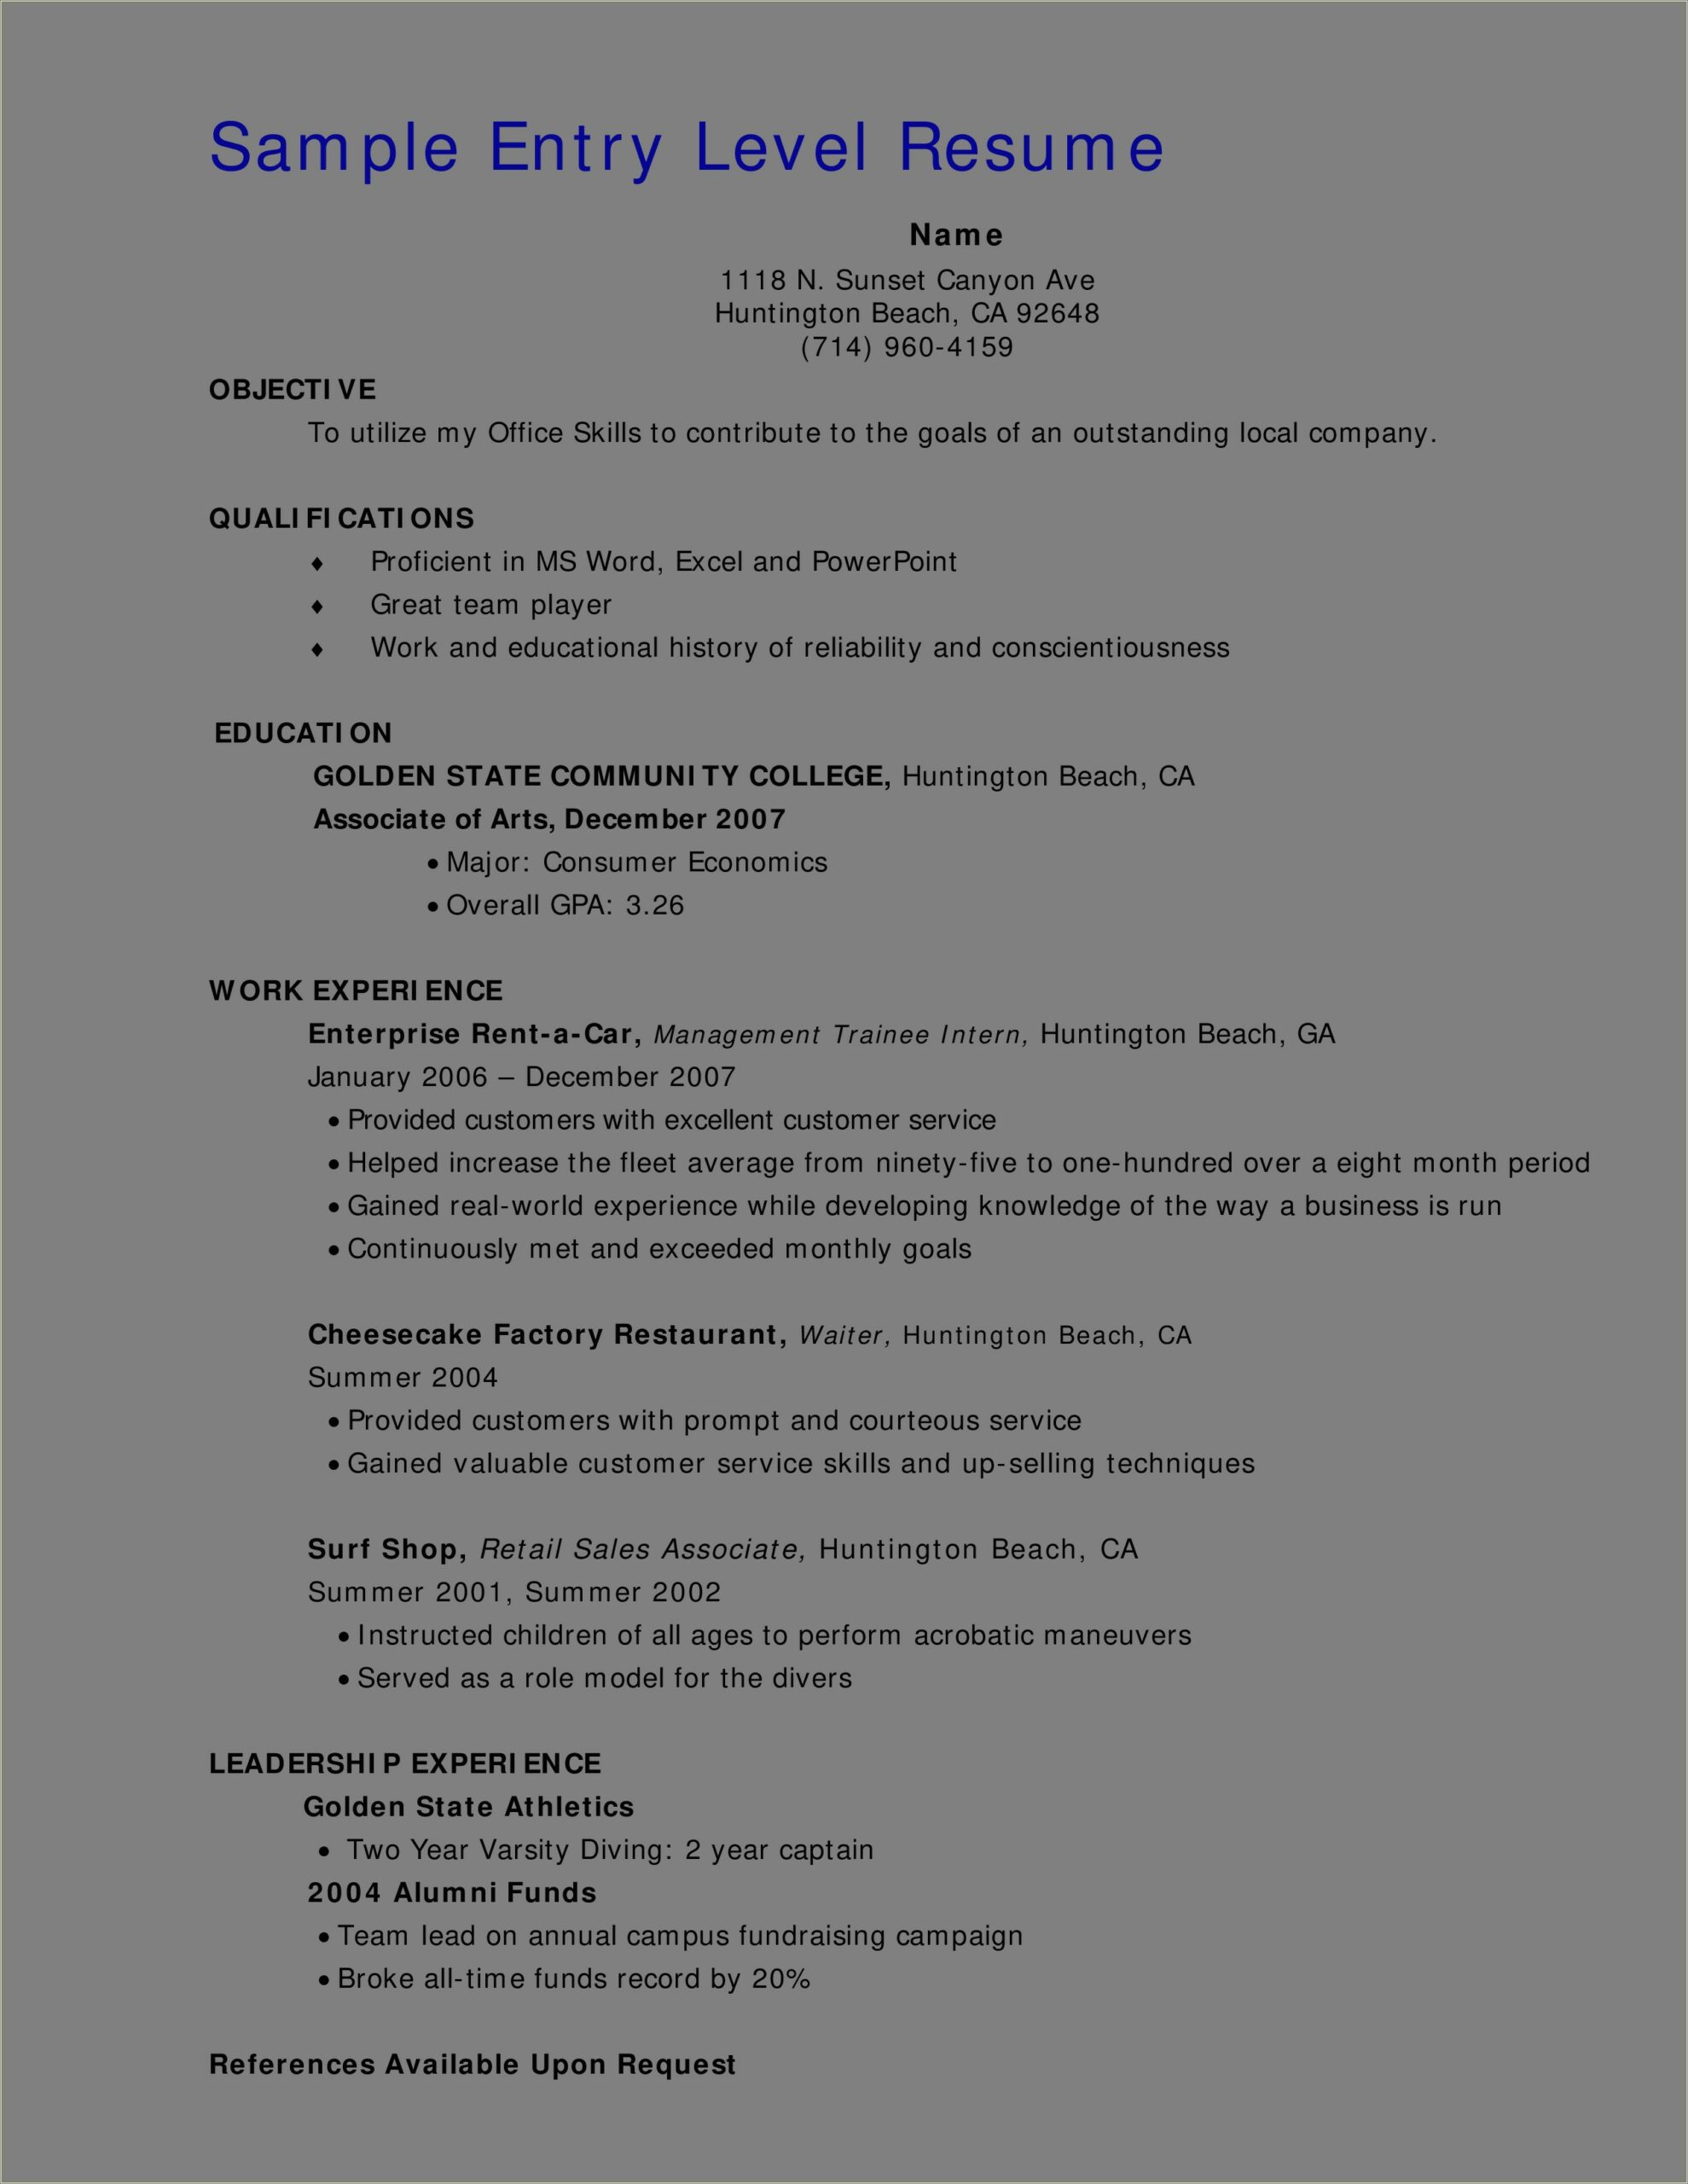 Resume Summary Examples Entry Level Sales